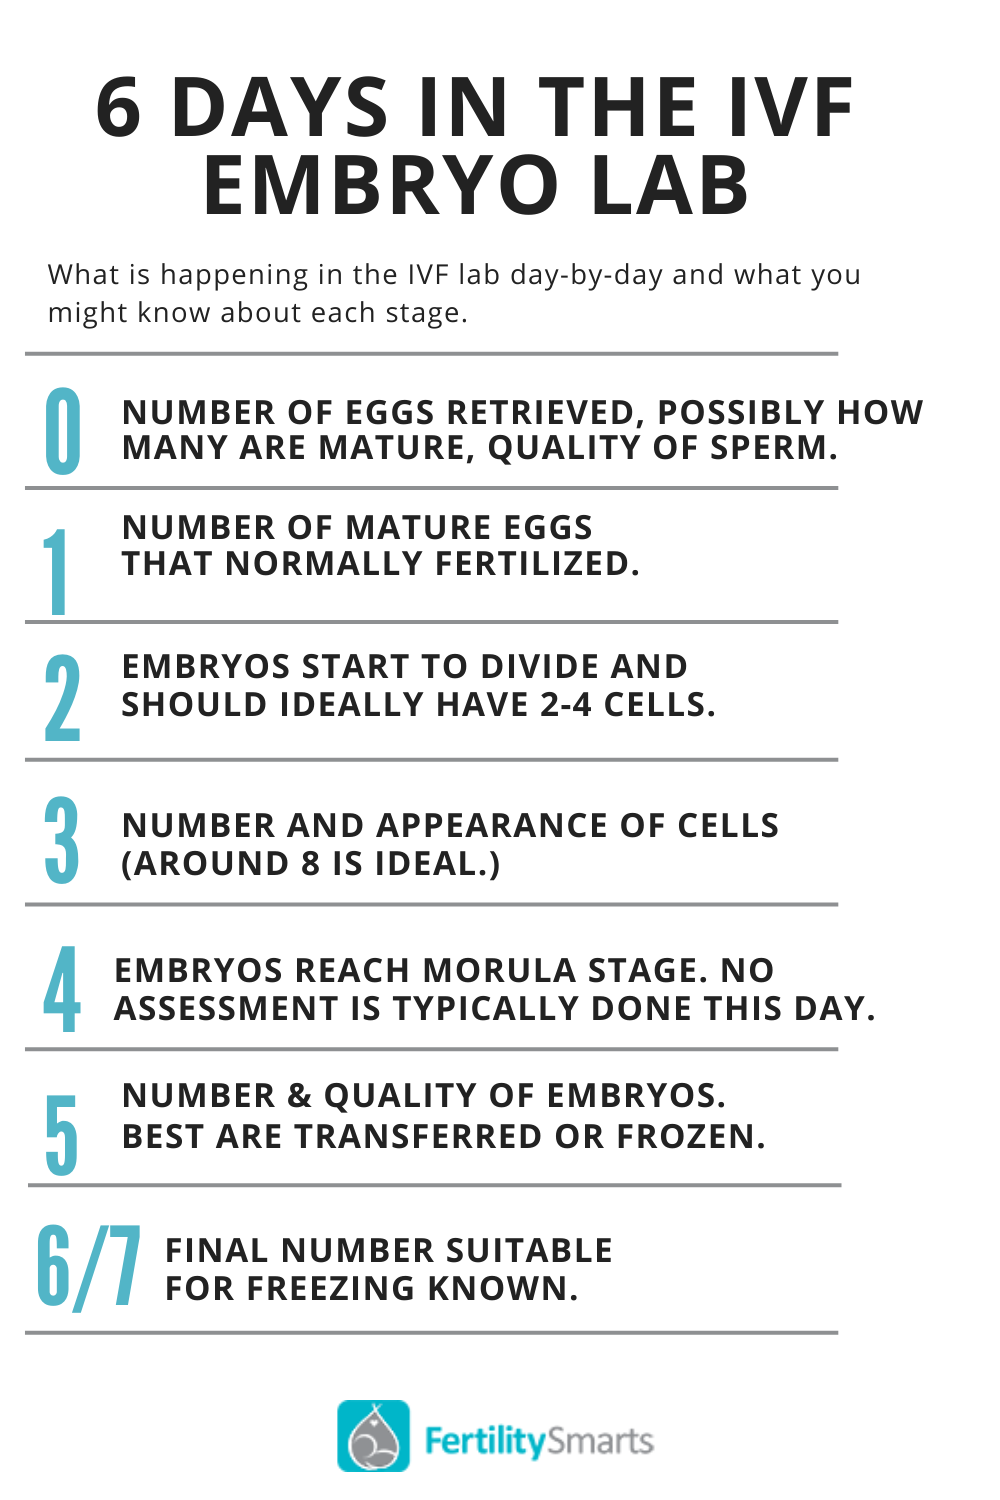 Timeline of how embryos develop in the IVF lab.